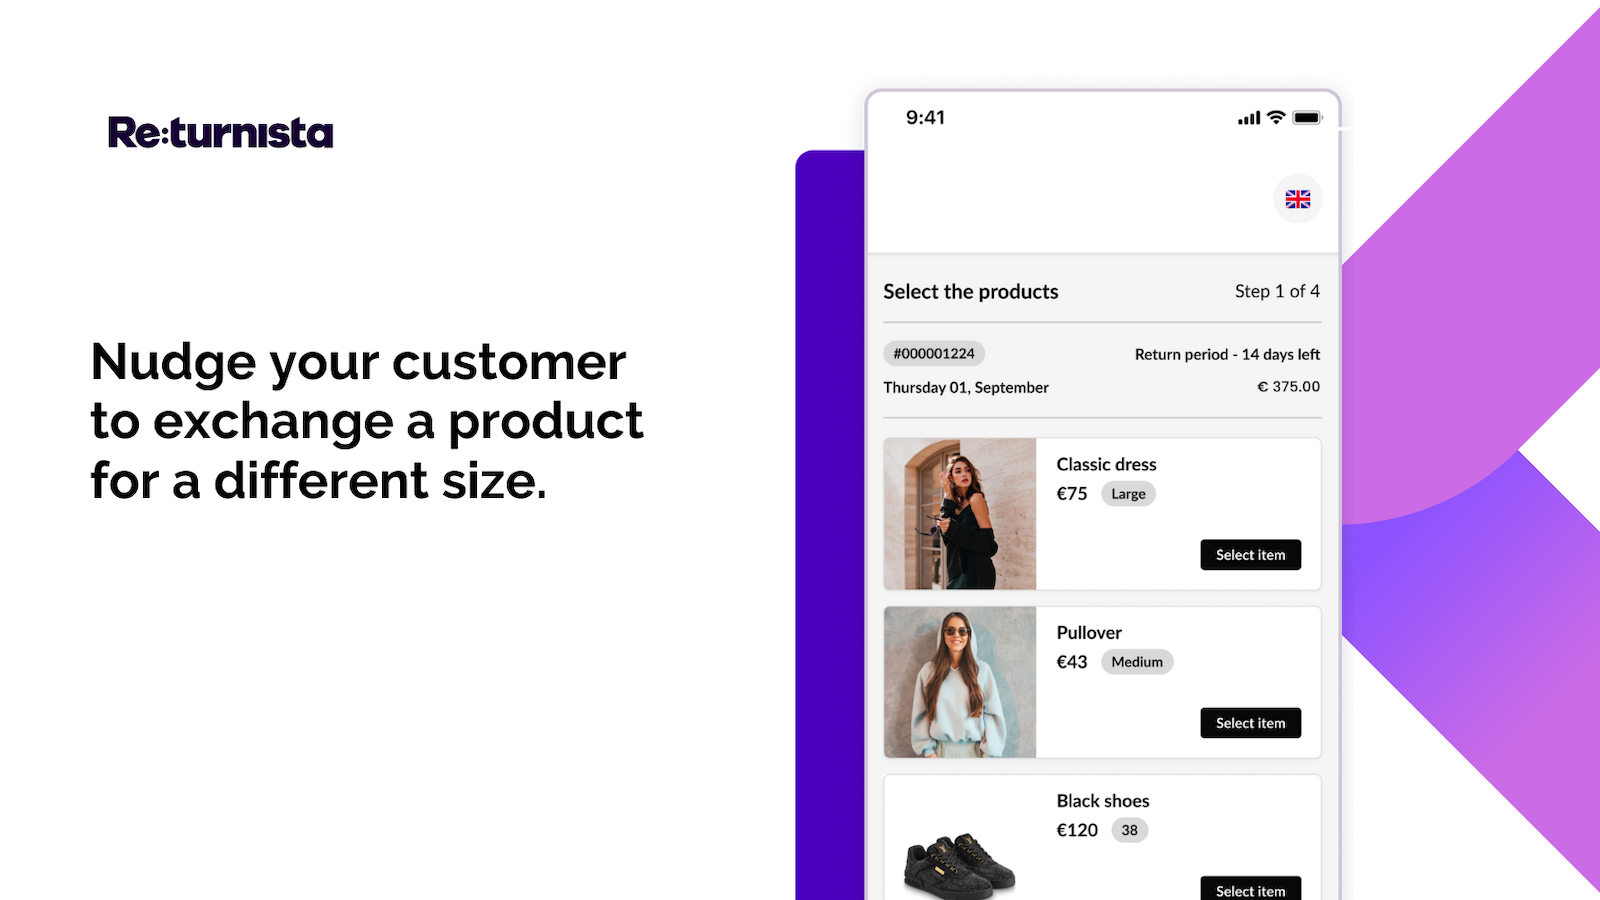 Nudge your customer to exchange a product for a different size